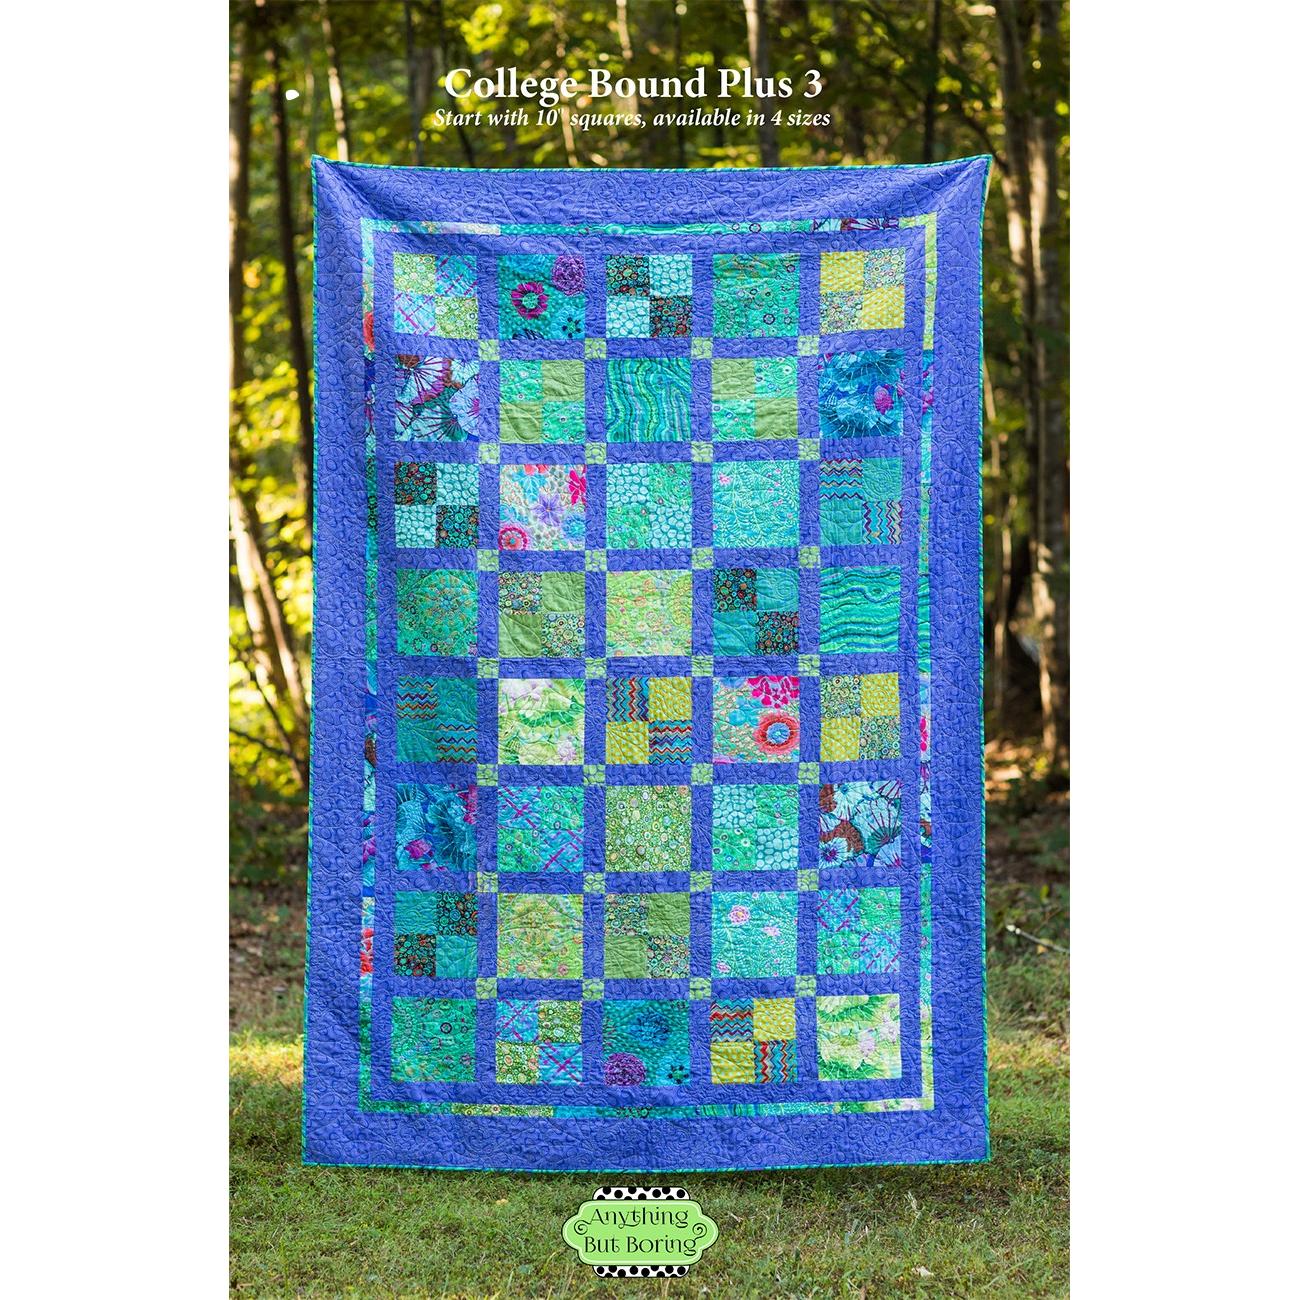 College Bound Plus 3 Quilt Pattern-Anything But Boring-My Favorite Quilt Store